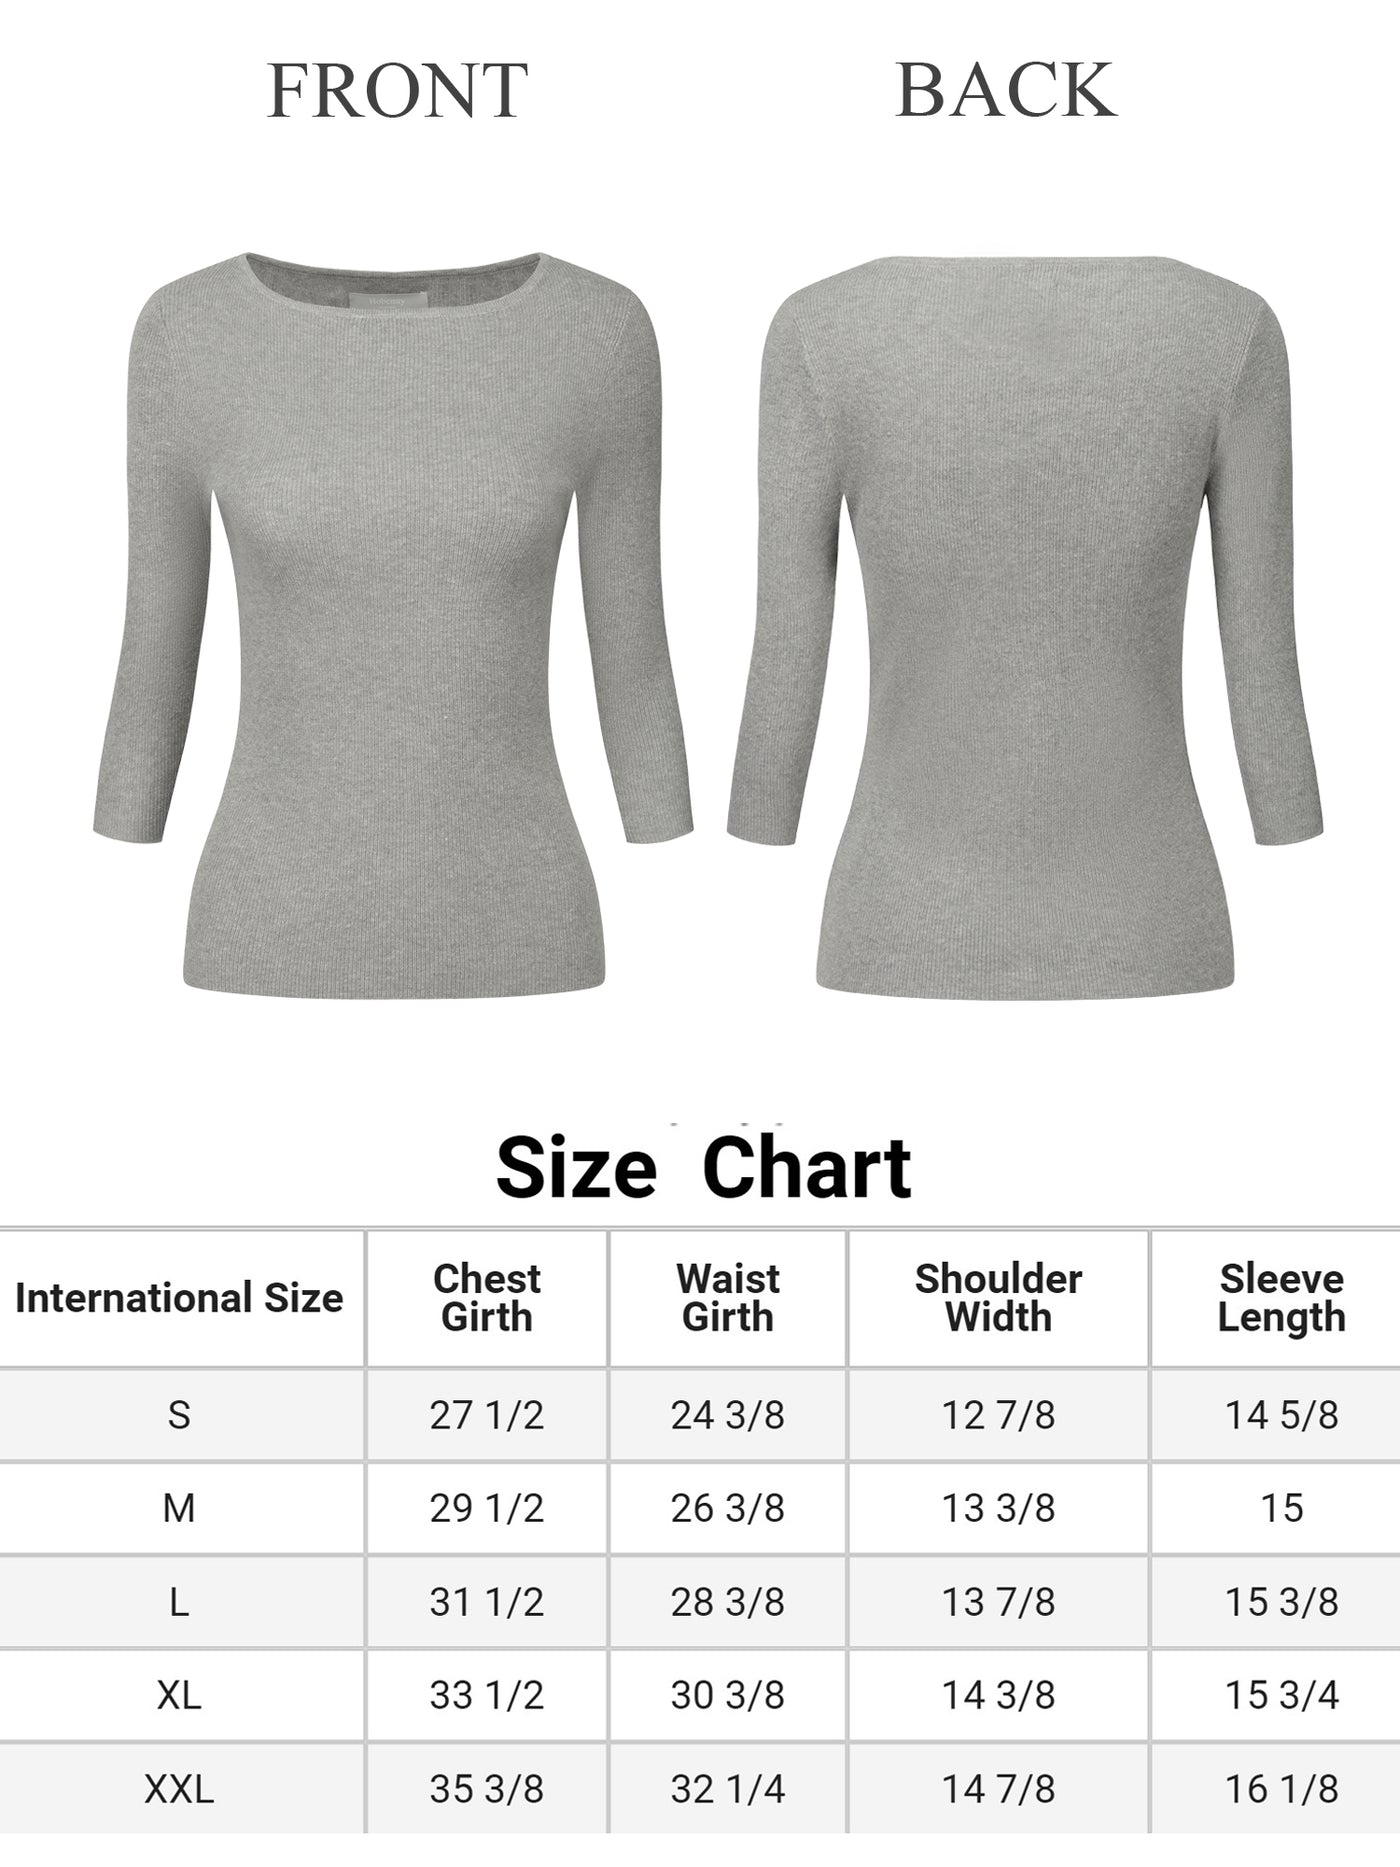 Bublédon Women's Knit Top Half Sleeve Boat Neck Slim Fit Ribbed Tee Tops